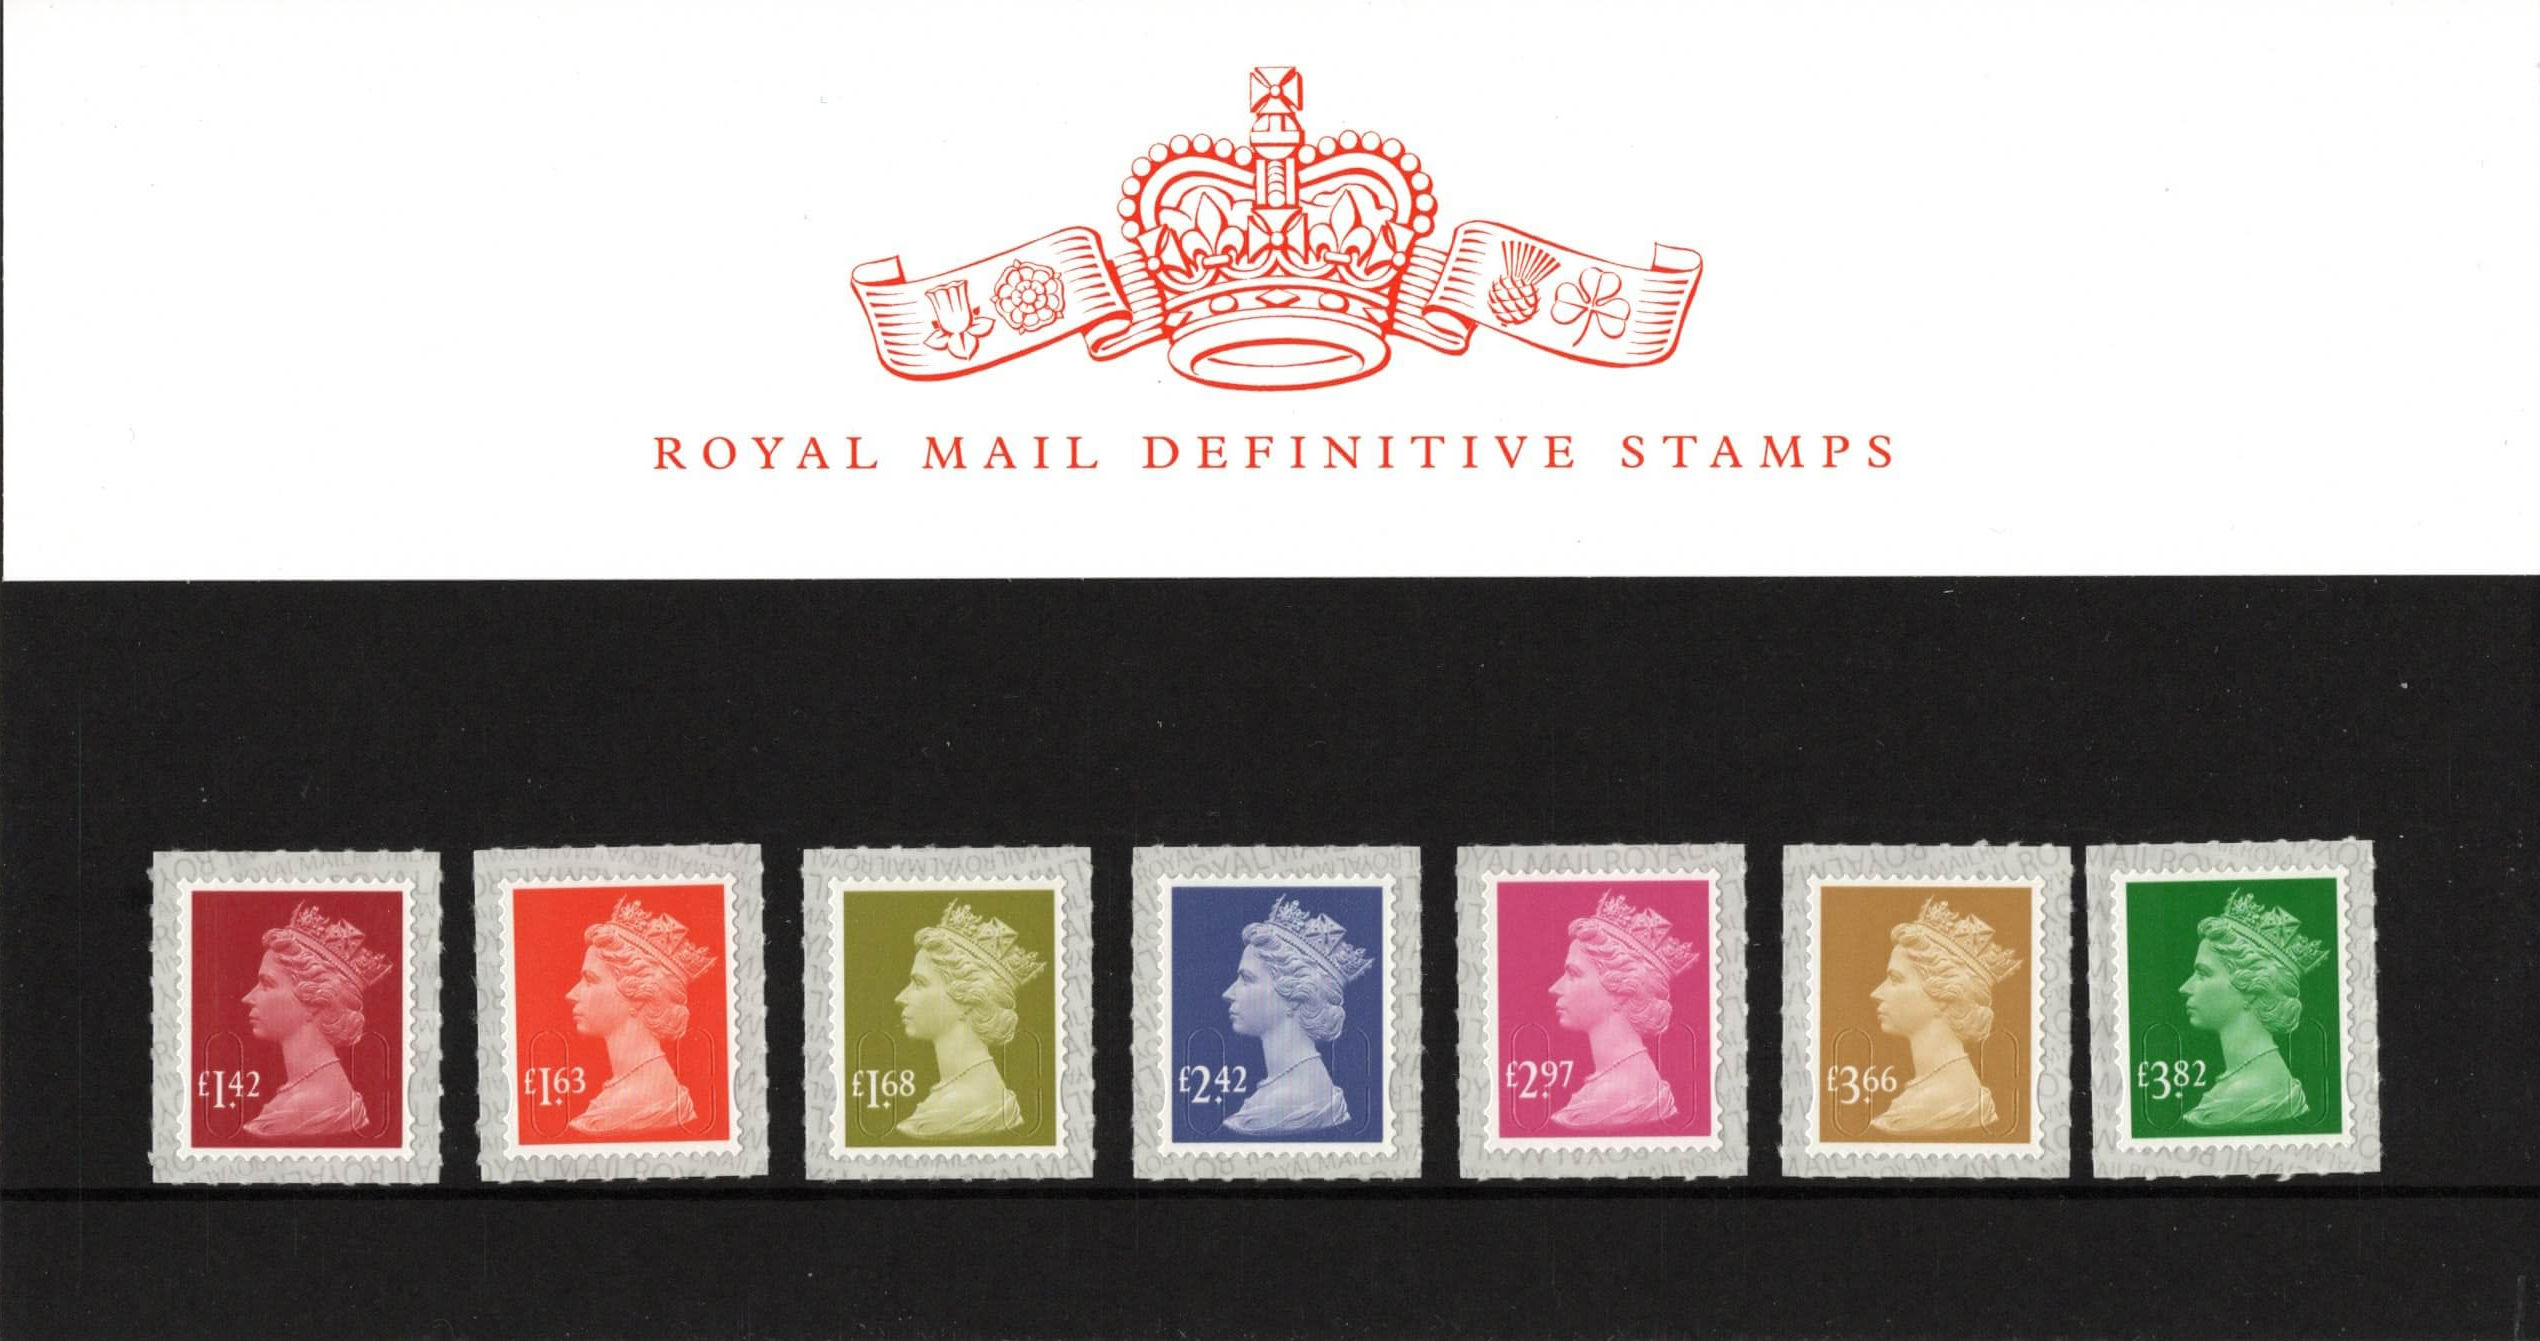 Gb collection. Kiloware Machin stamps. Royal mail Promo. 5 Вопросов к Mary collect beautiful of stamps.